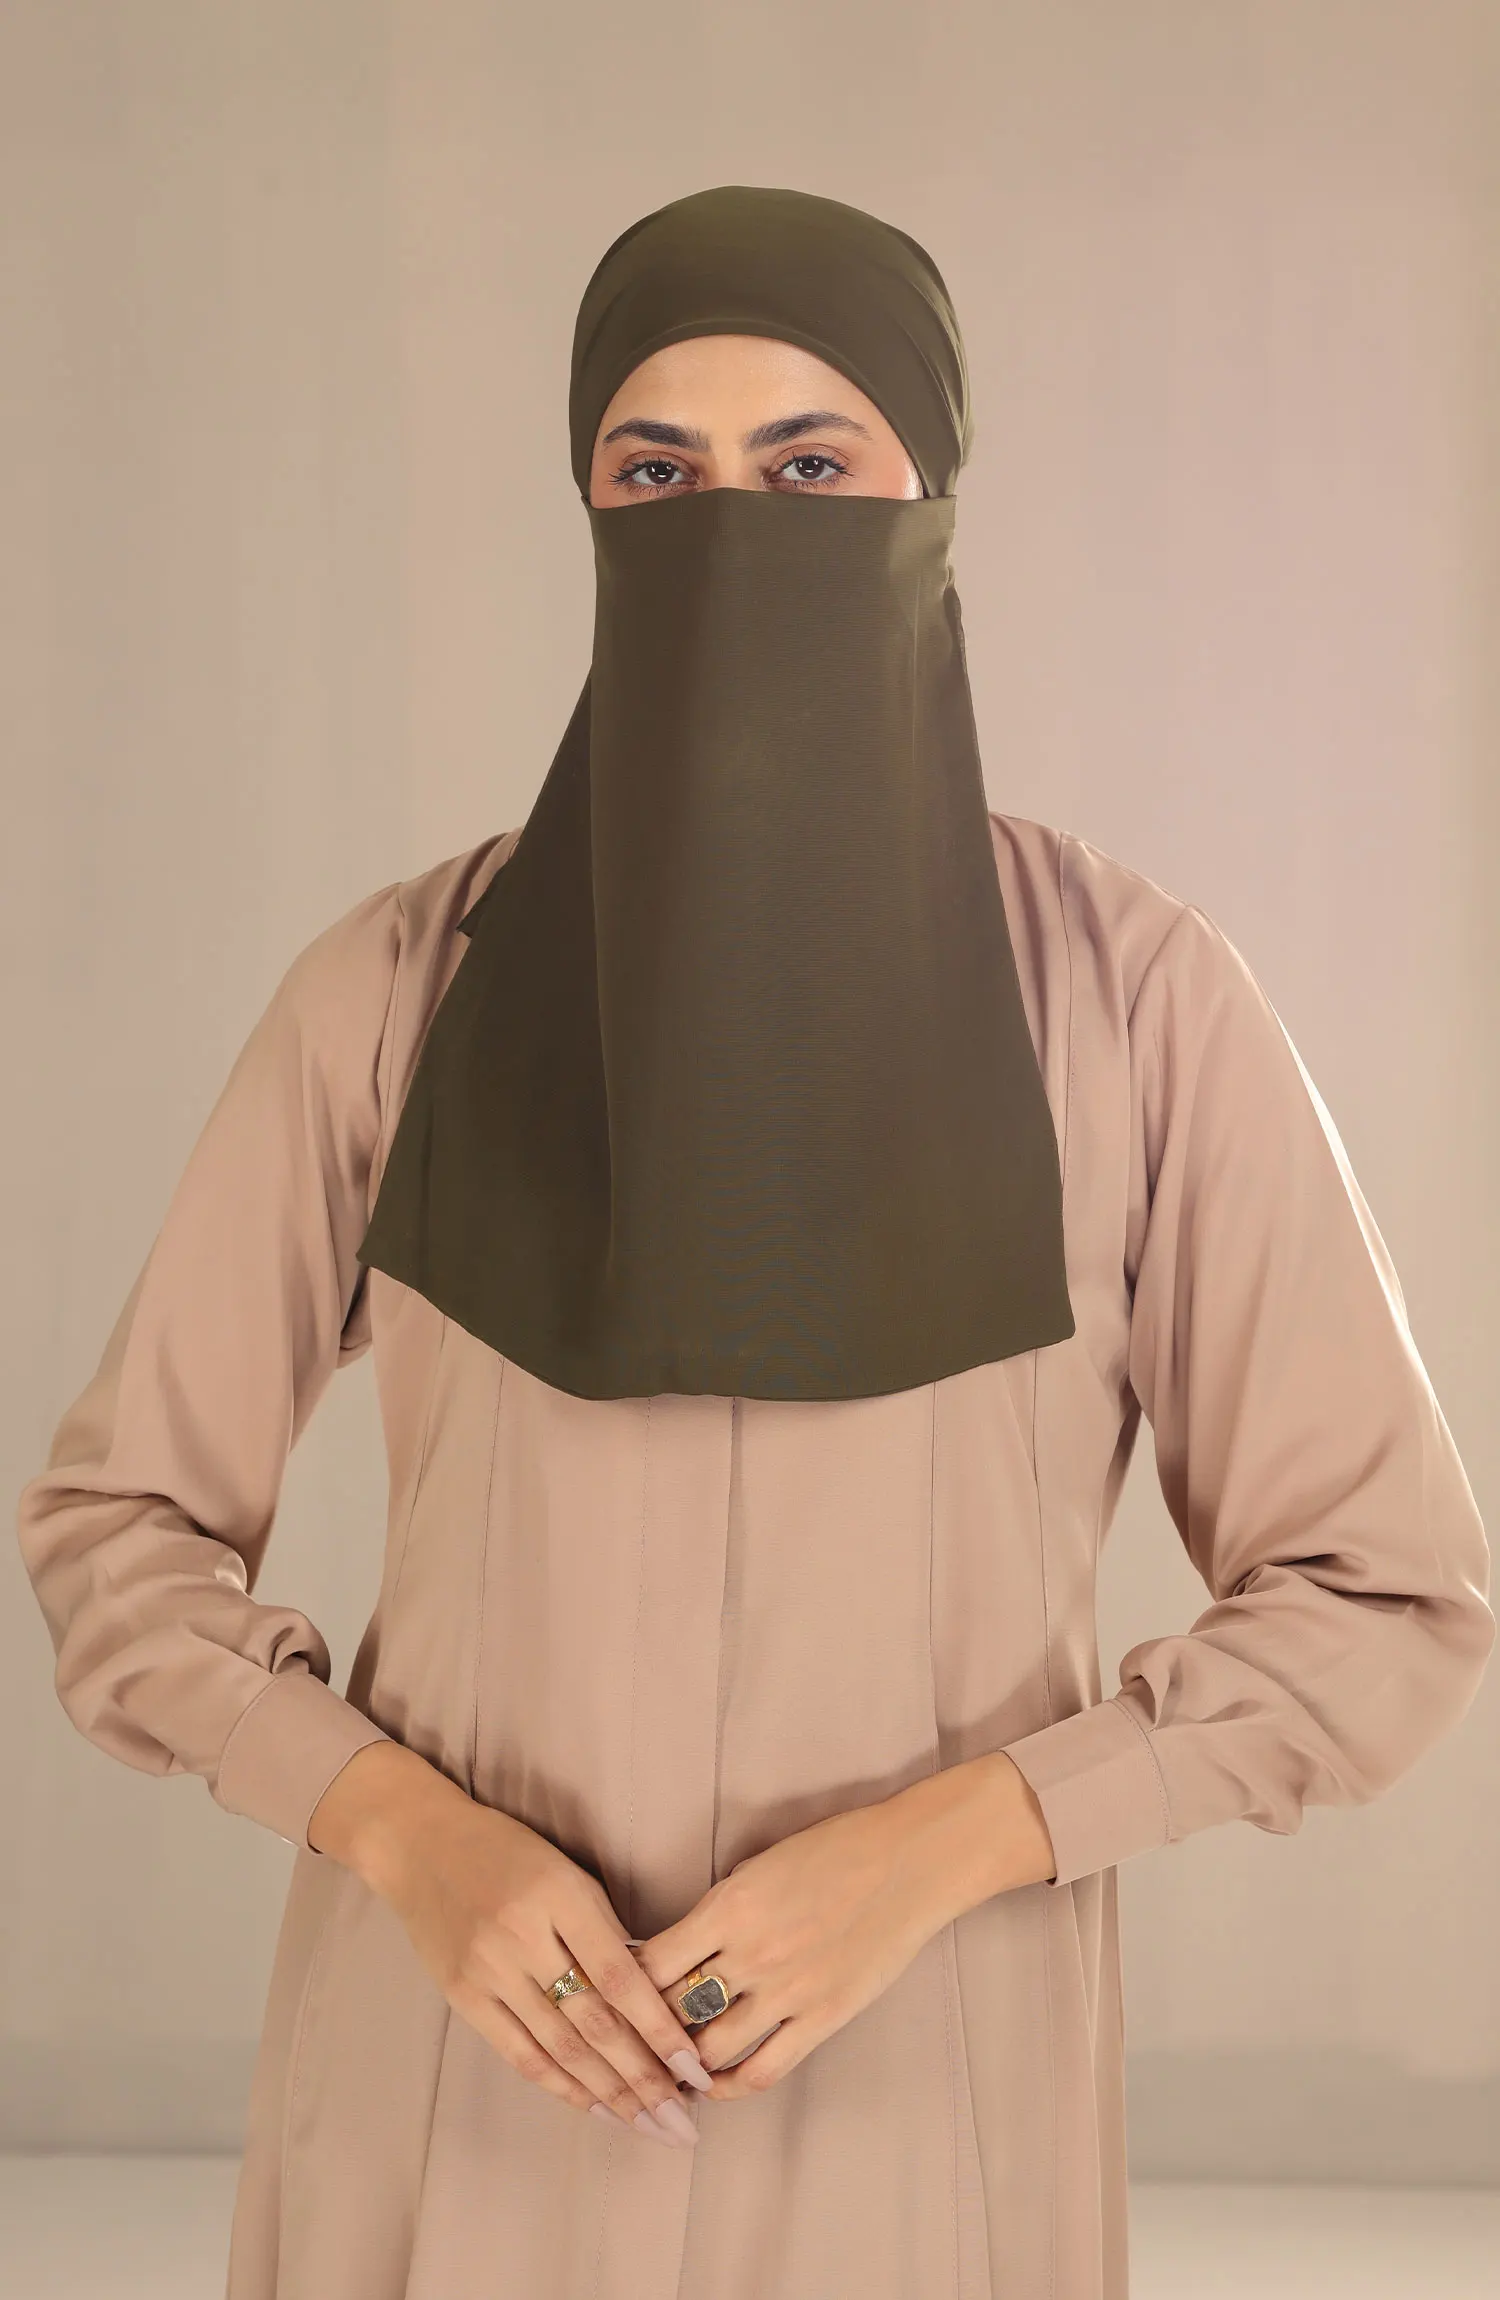 Black Camels Half Niqab With Ties Collection - HNWT-04